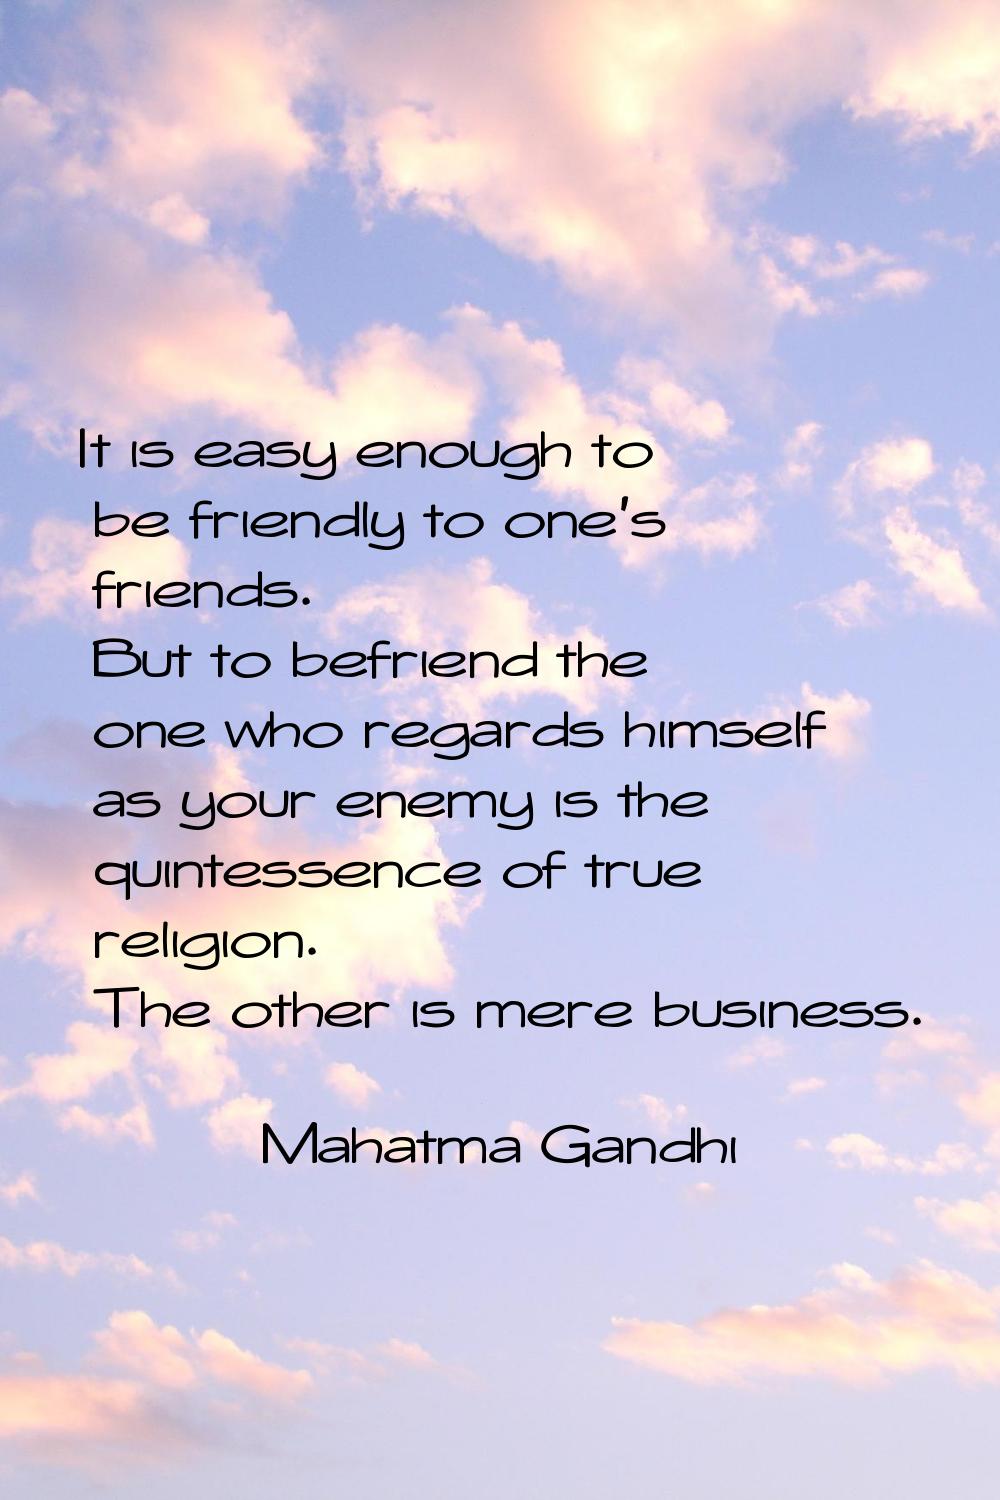 It is easy enough to be friendly to one's friends. But to befriend the one who regards himself as y